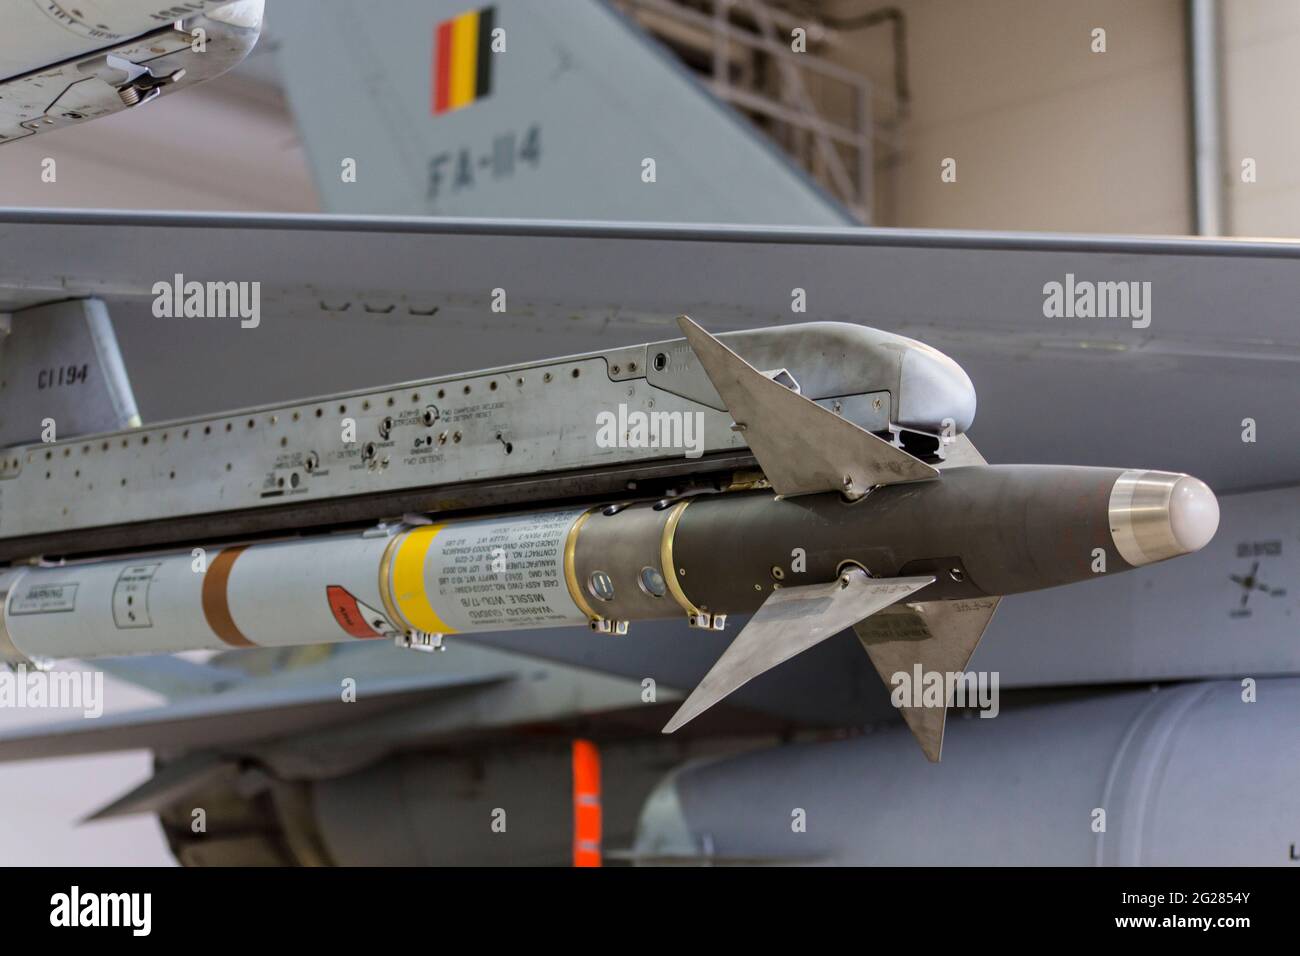 Live AIM-9M missile on a Belgian F-16 jet. Stock Photo